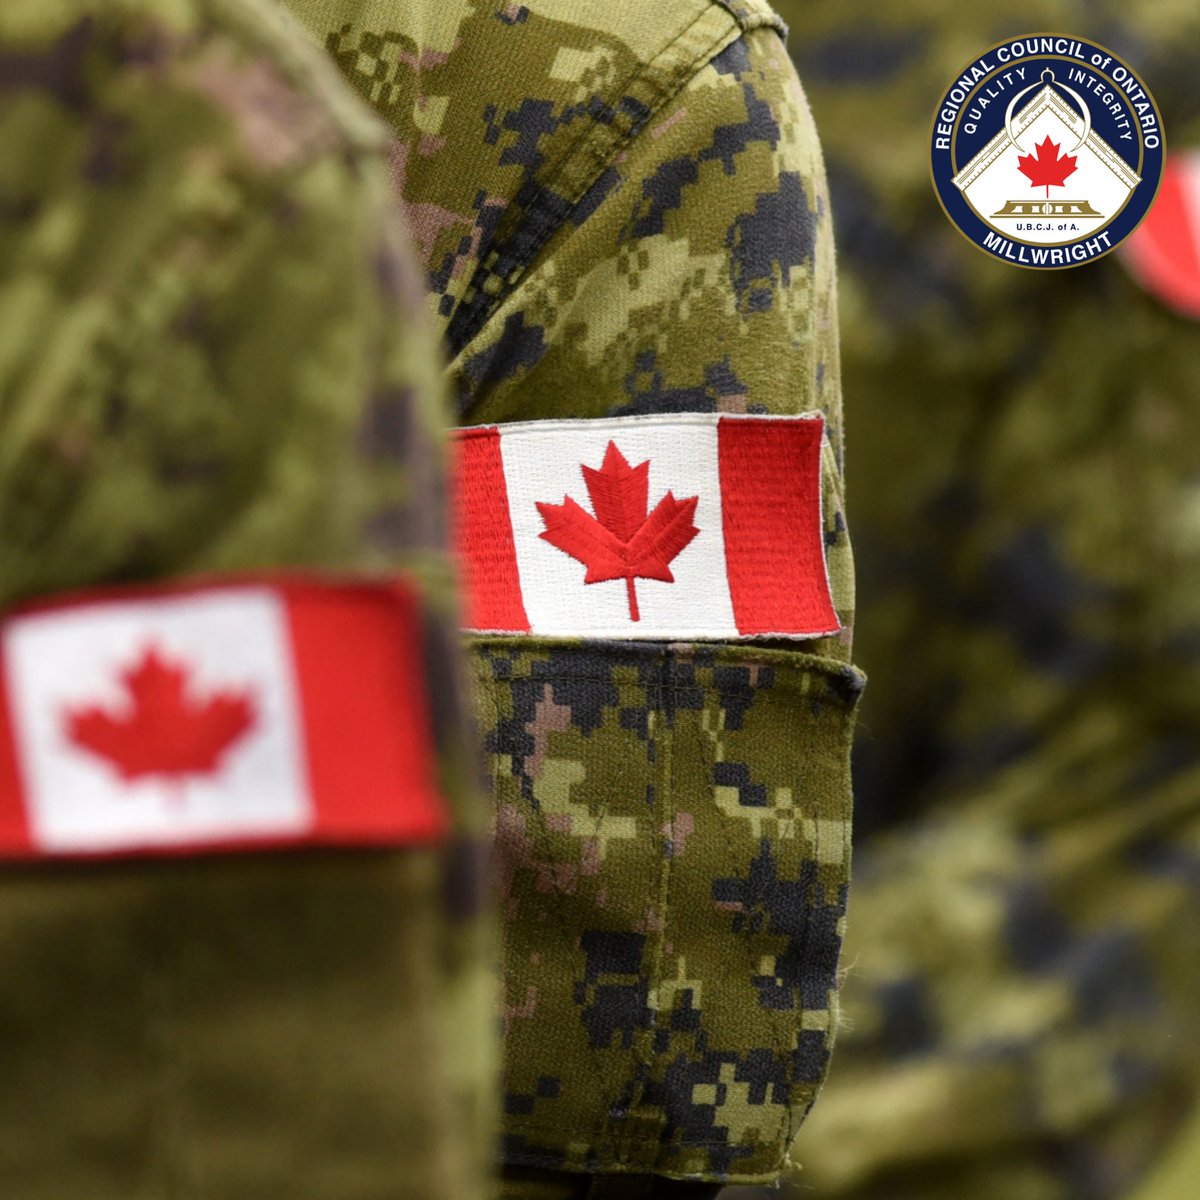 We share our gratitude, sorrow and pride for all who served, sacrificed and died for our freedoms. Please pause to remember the brave men and women who served, and continue to serve, our country.

#LestWeForget #Veterans #RememberThem #CAF #RemembranceDay2022 #HelmetsToHardhats